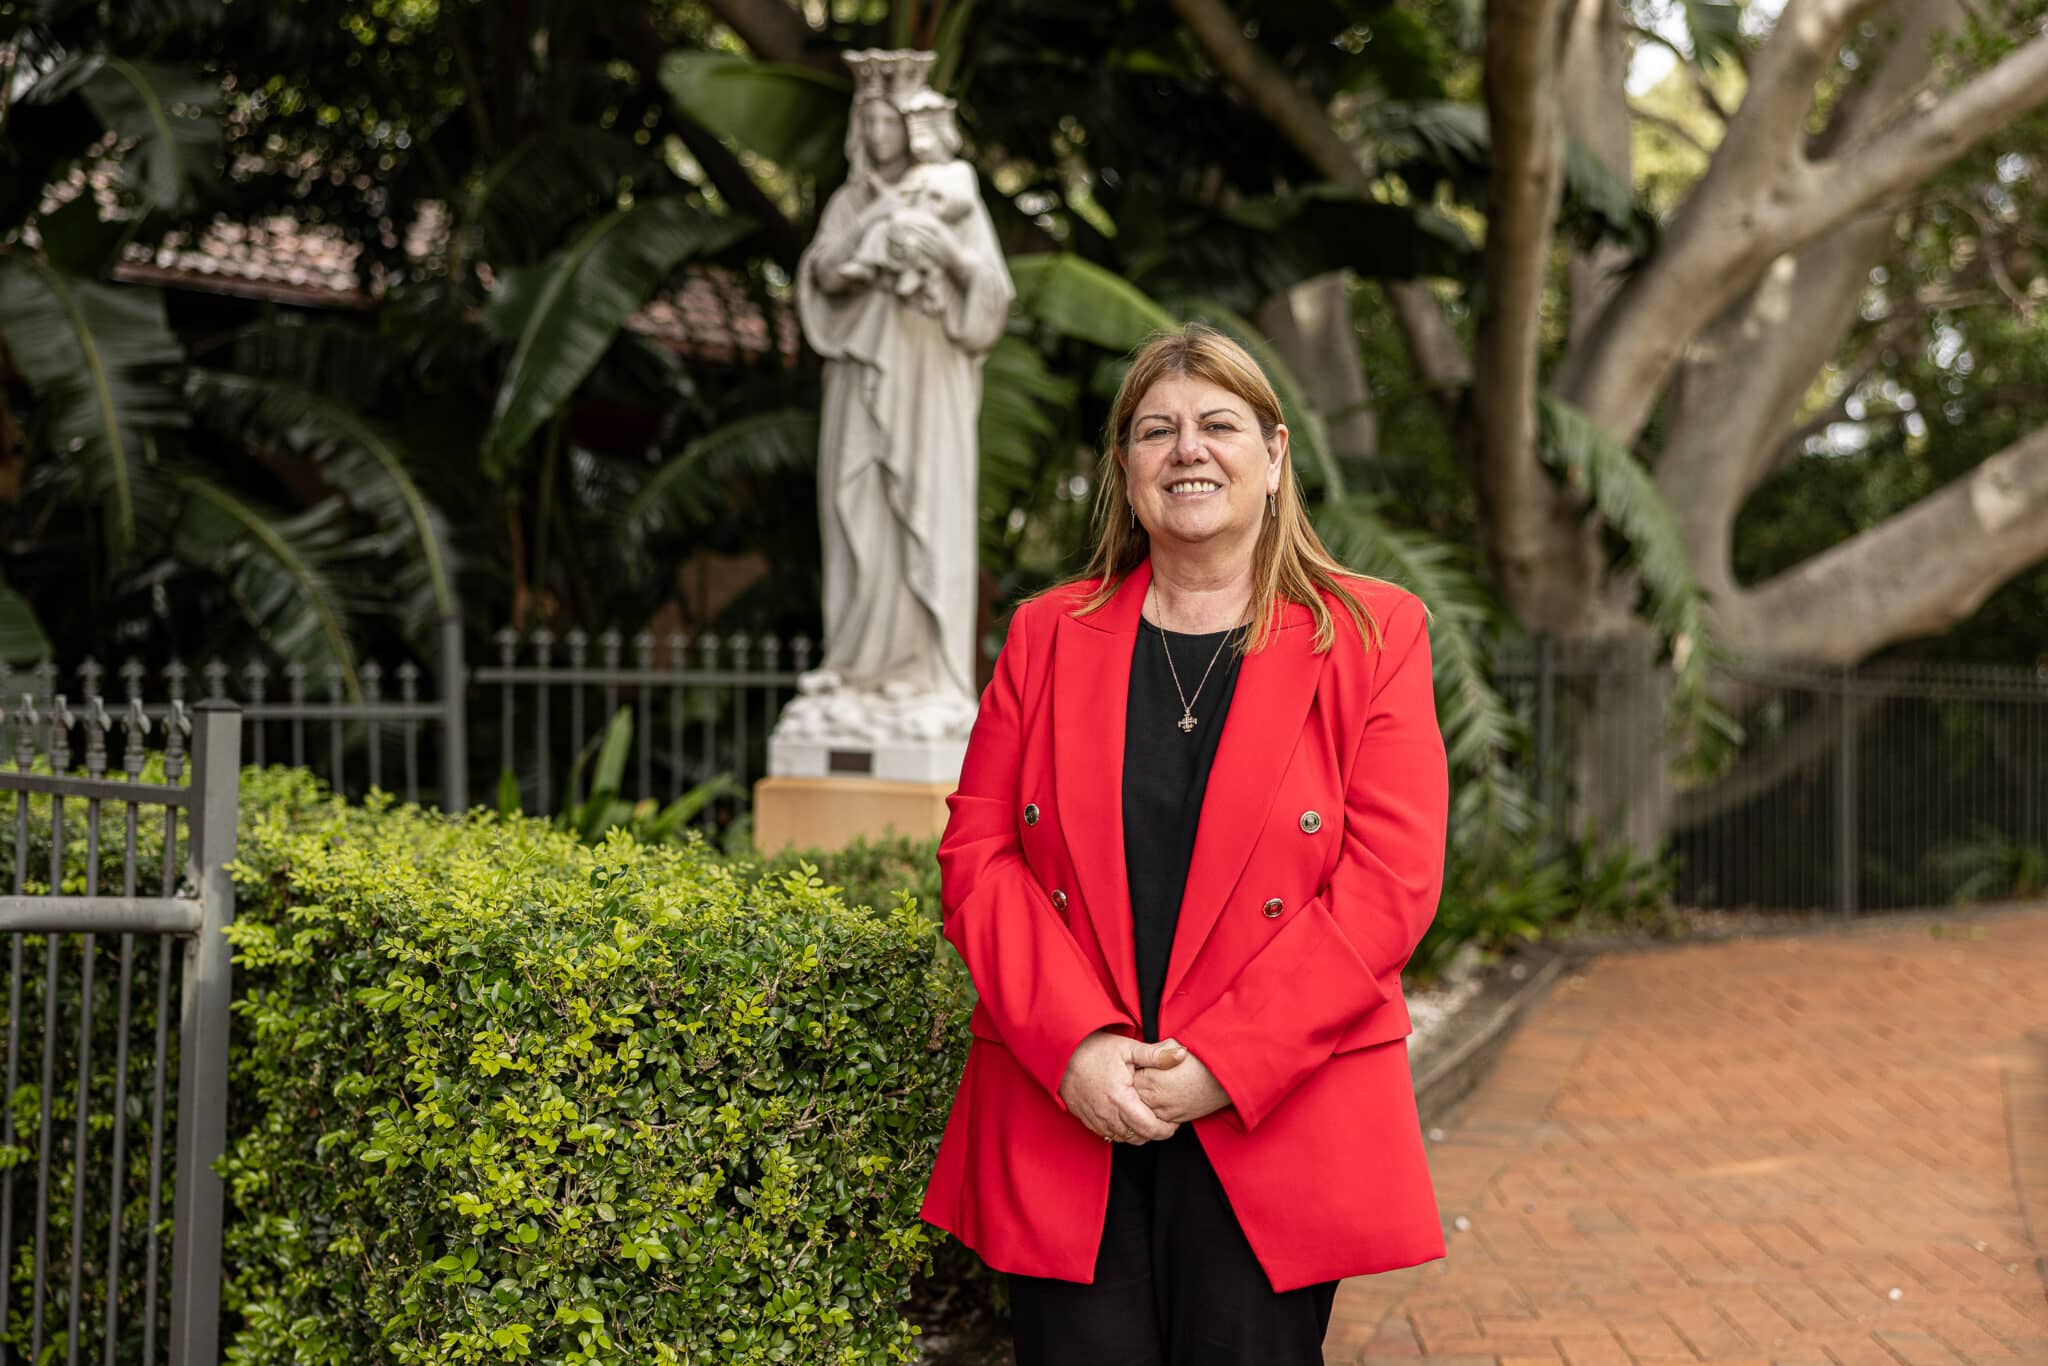 Our Lady of the Sacred Heart College in Kensington - The Catholic weekly